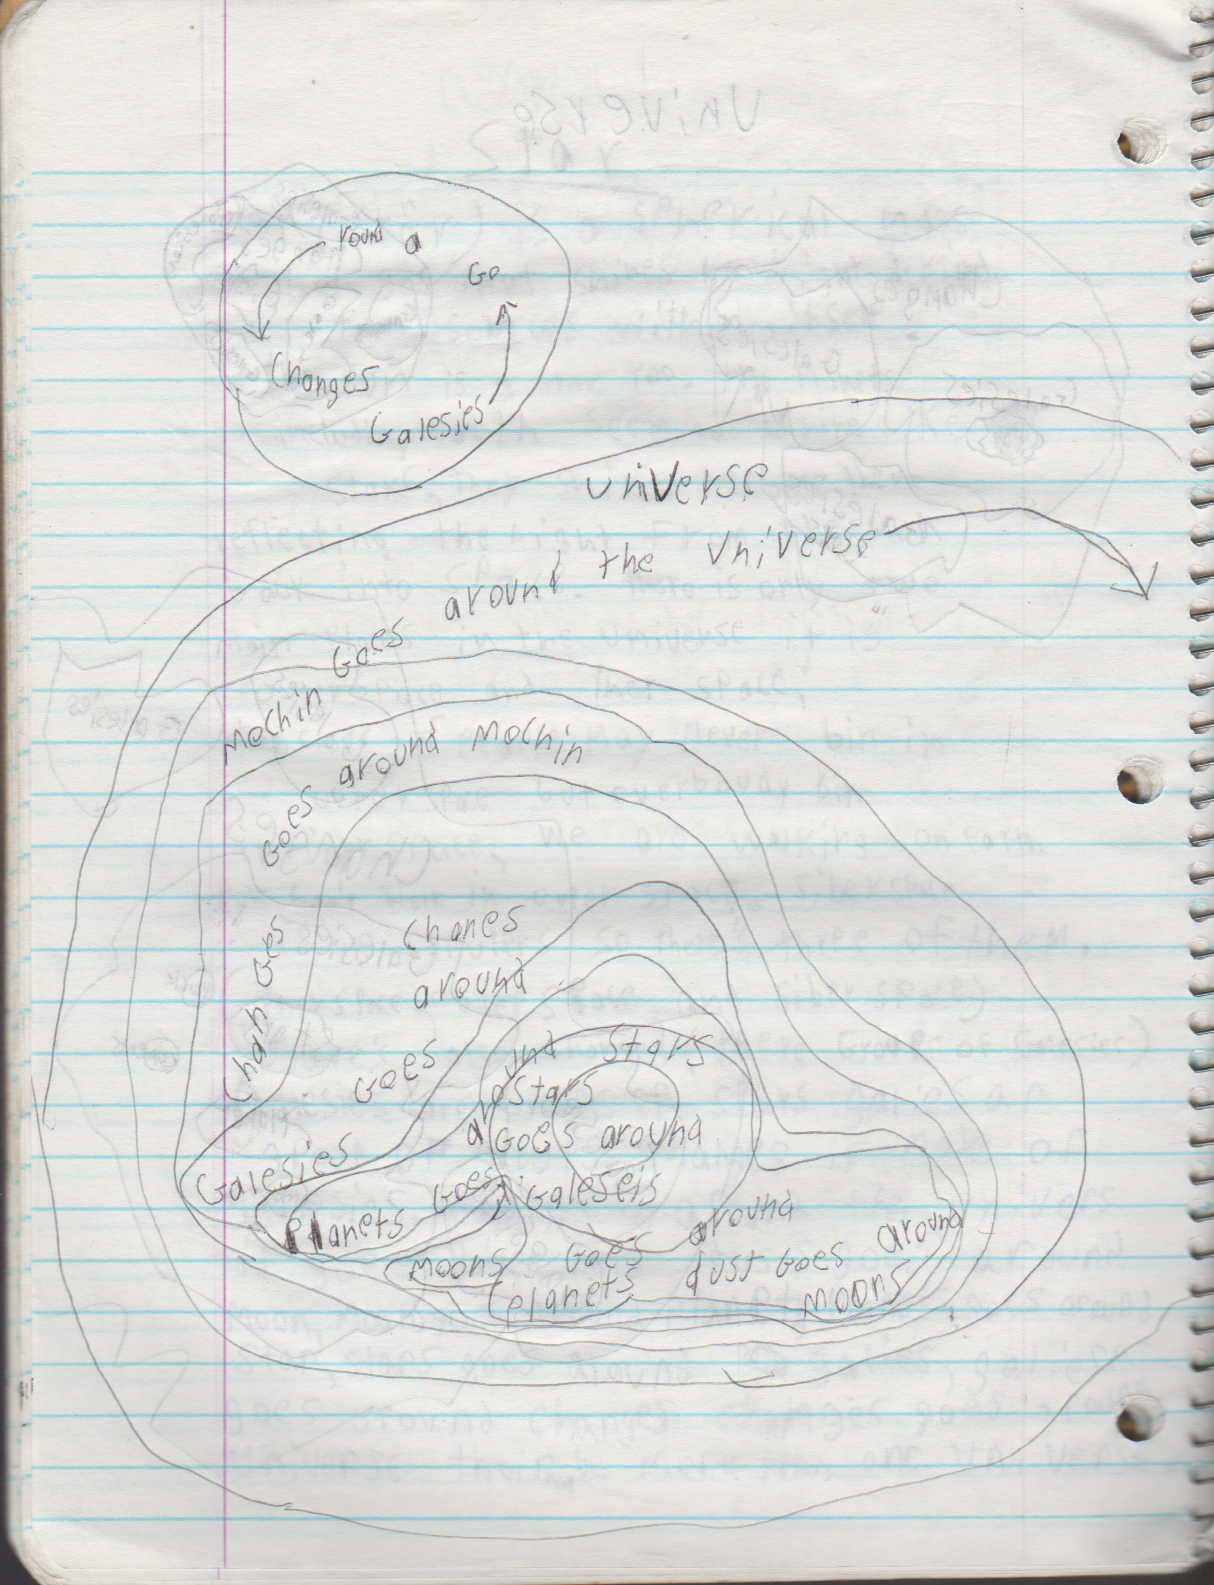 1996-08-18 - Saturday - 11 yr old Joey Arnold's School Book, dates through to 1998 apx, mostly 96, Writings, Drawings, Etc-030.png